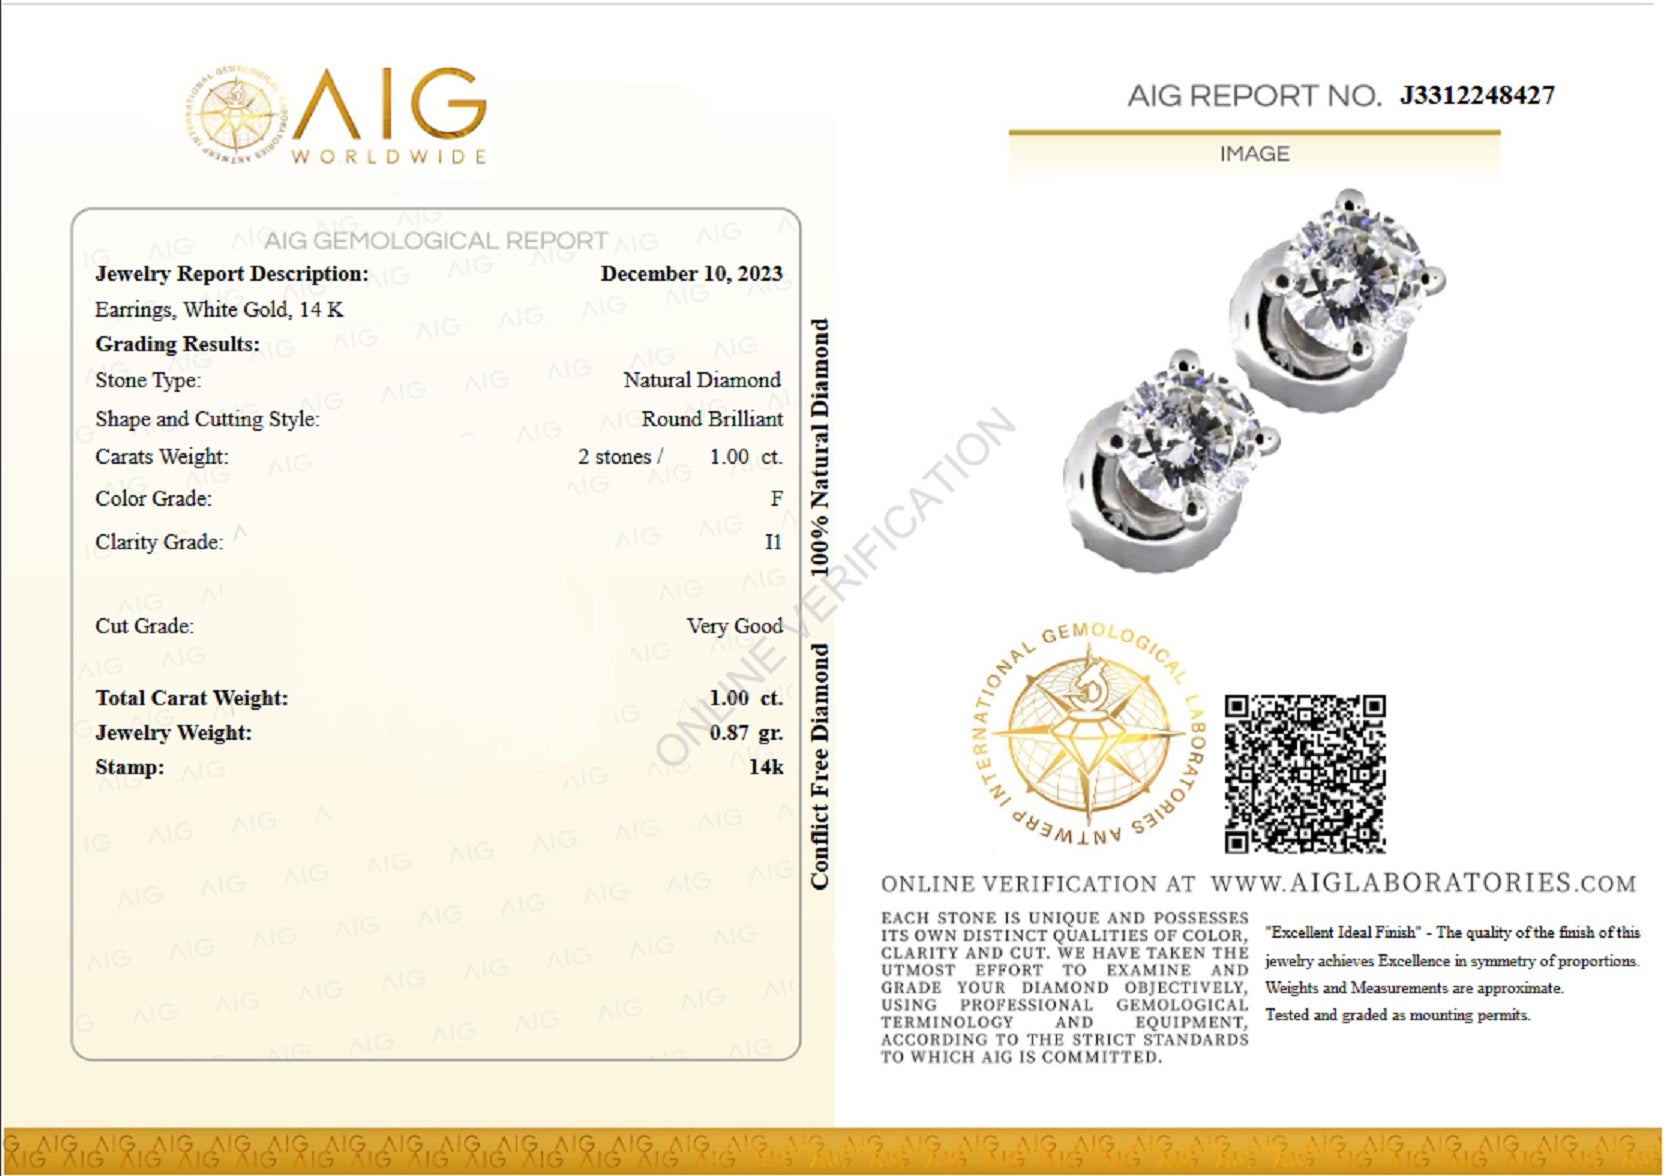 Don't miss your chance to own this unique and exquisite earrings of top quality.

Center Natural Diamonds:
Shape: Round Brilliant
Weight: 1.00 cttw / 2 stone
Color: F
Clarity: I1
Clarity Characteristics: Cloud.

Size: 6.40 mm

VAT and TAXES:

Please